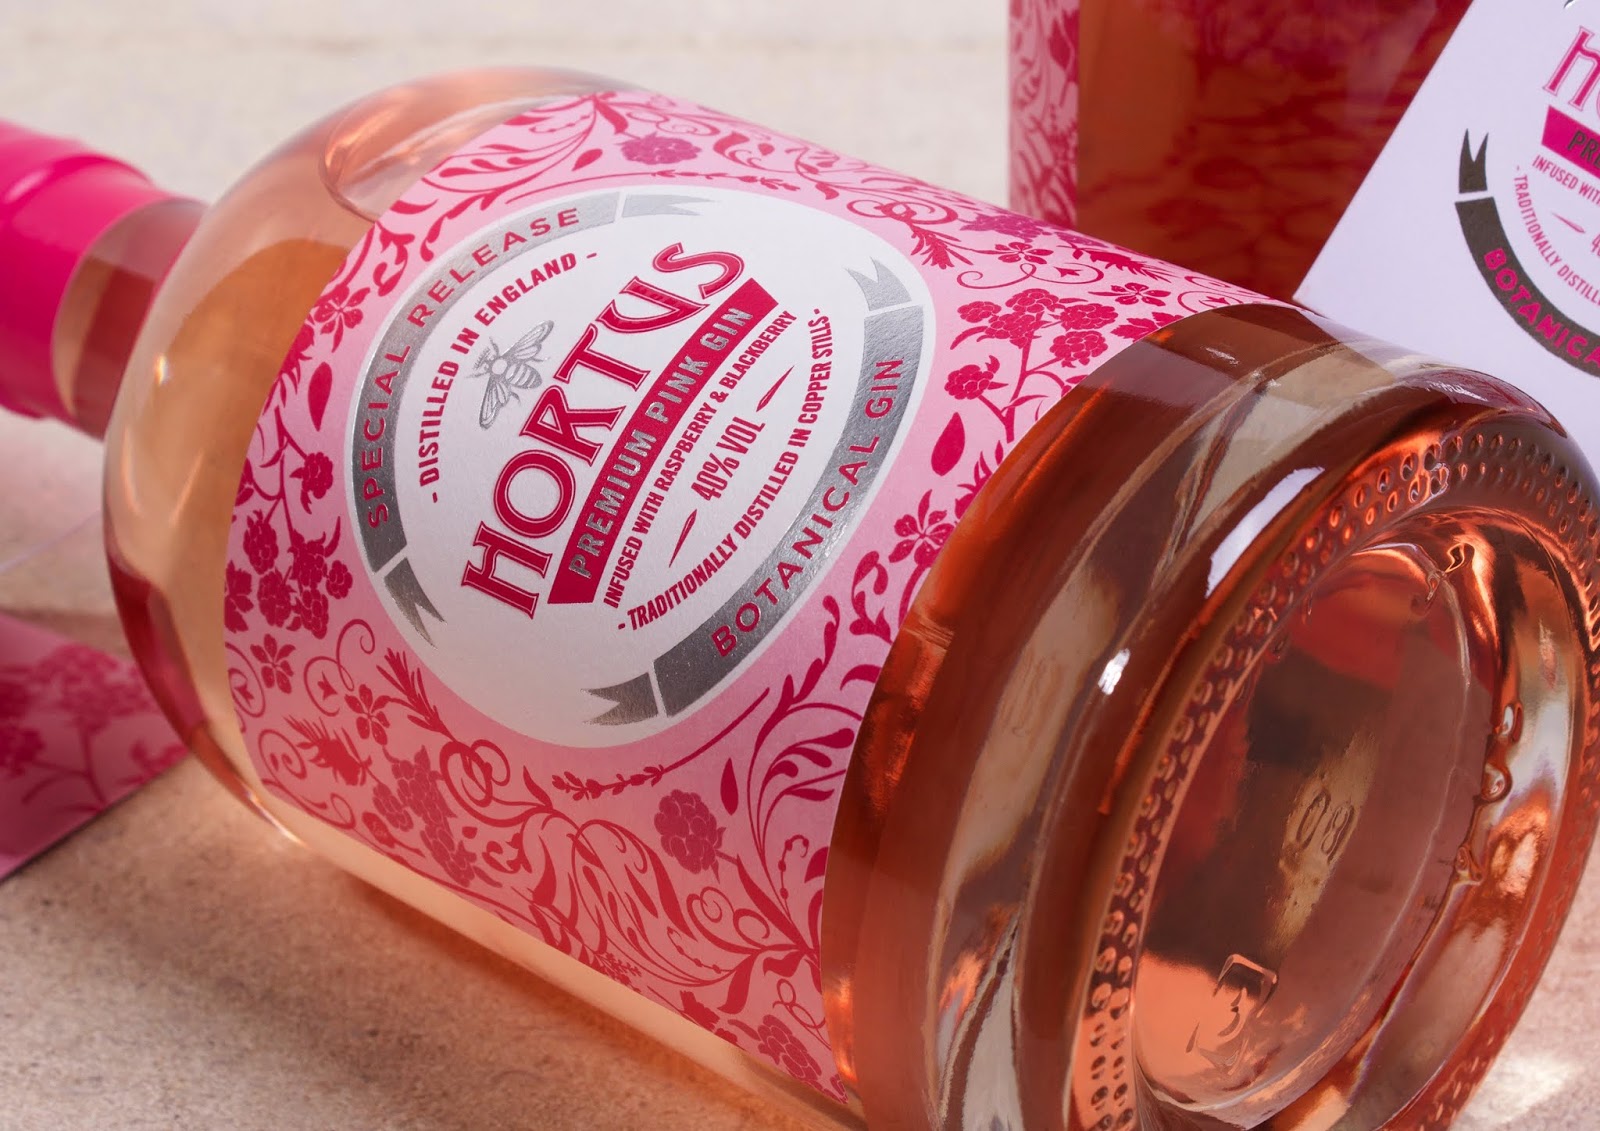 Pink World Hortus Premium – Packaging The Of Gin